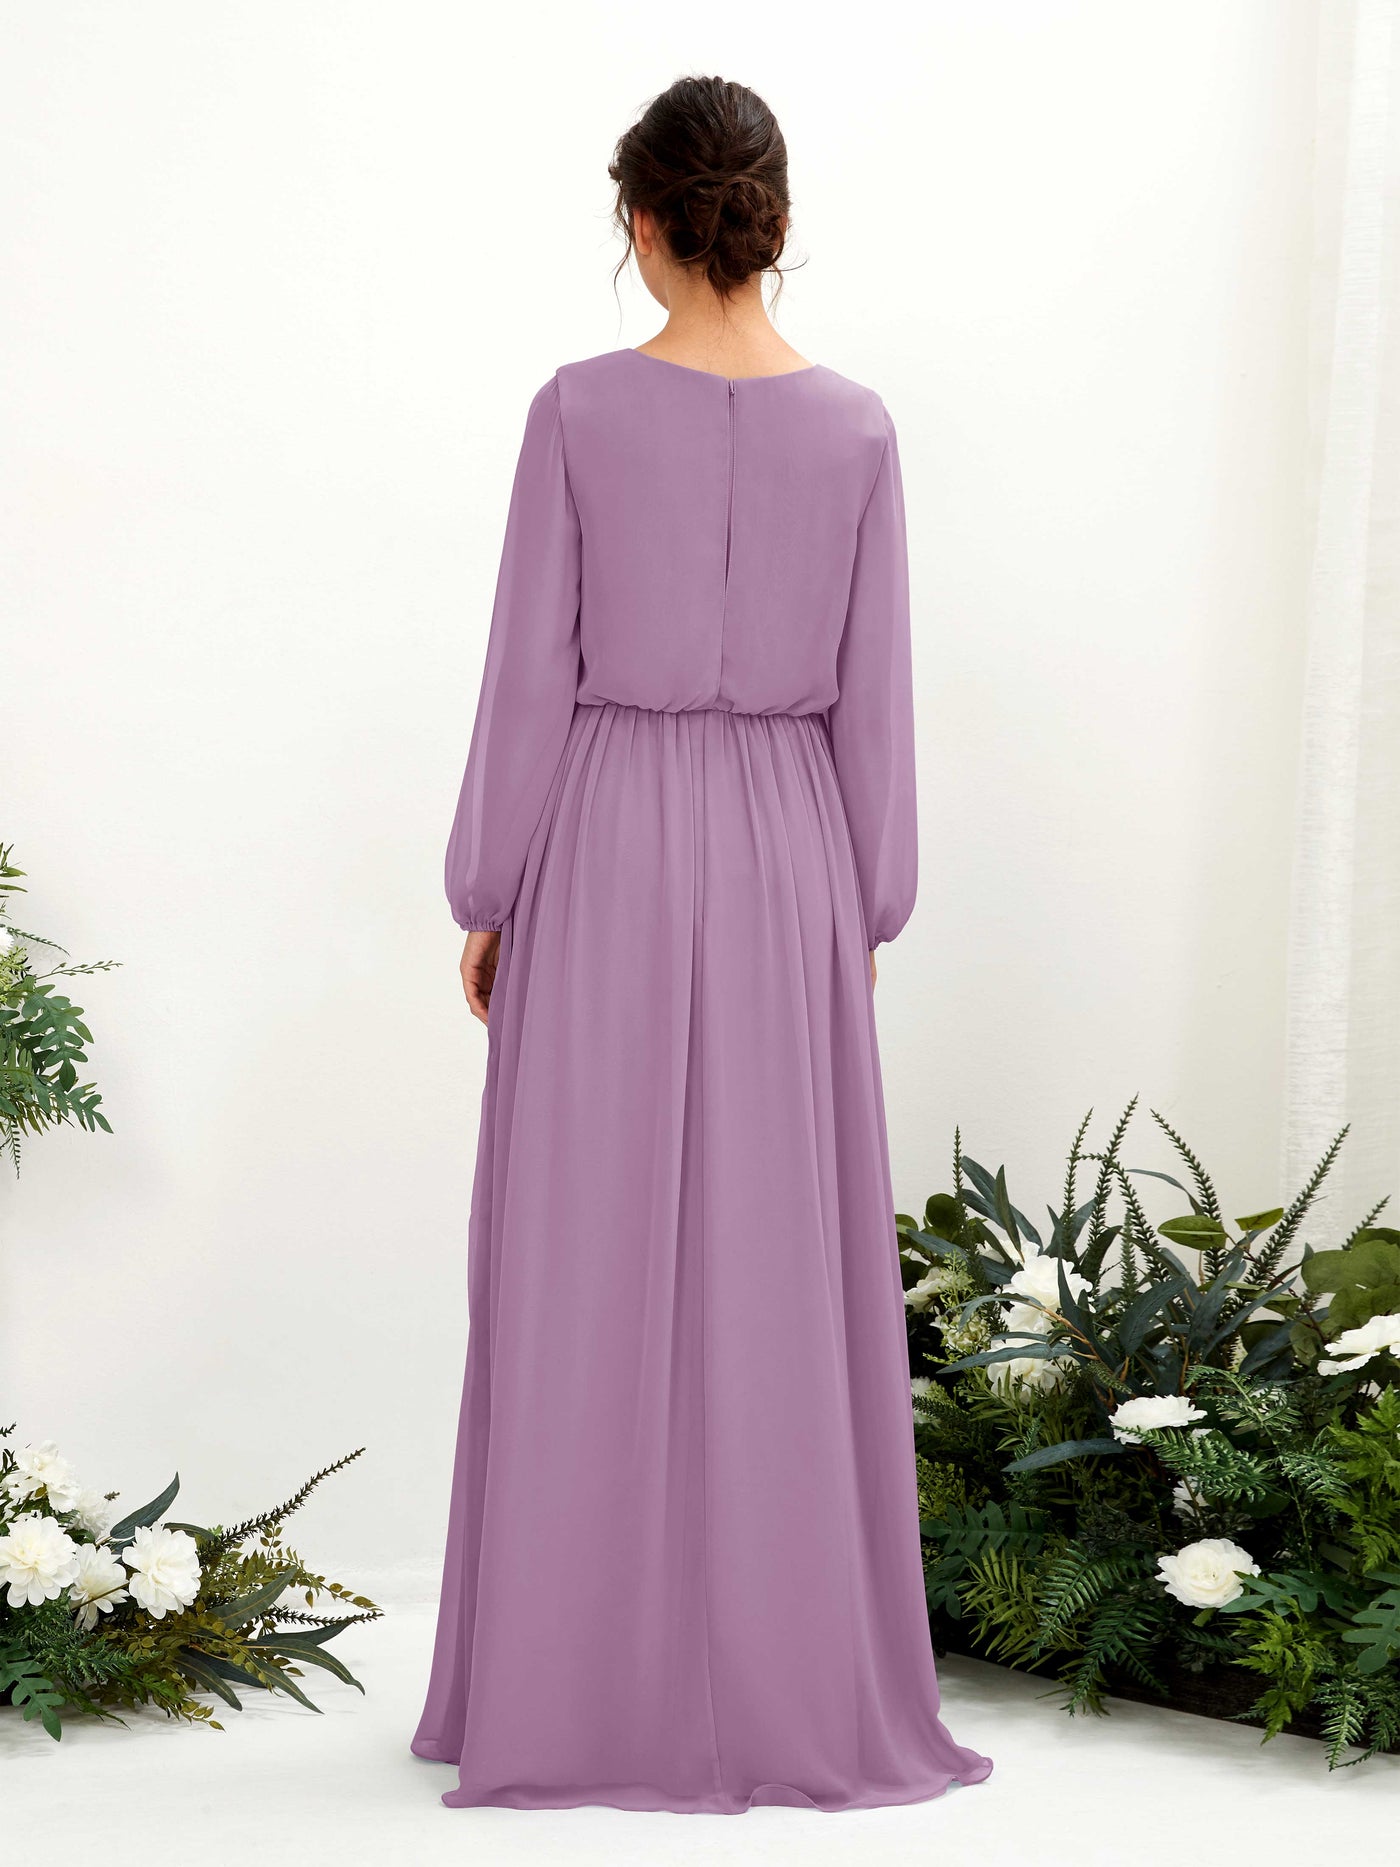 Orchid Mist Bridesmaid Dresses Bridesmaid Dress A-line Chiffon V-neck Full Length Long Sleeves Wedding Party Dress (81223821)#color_orchid-mist